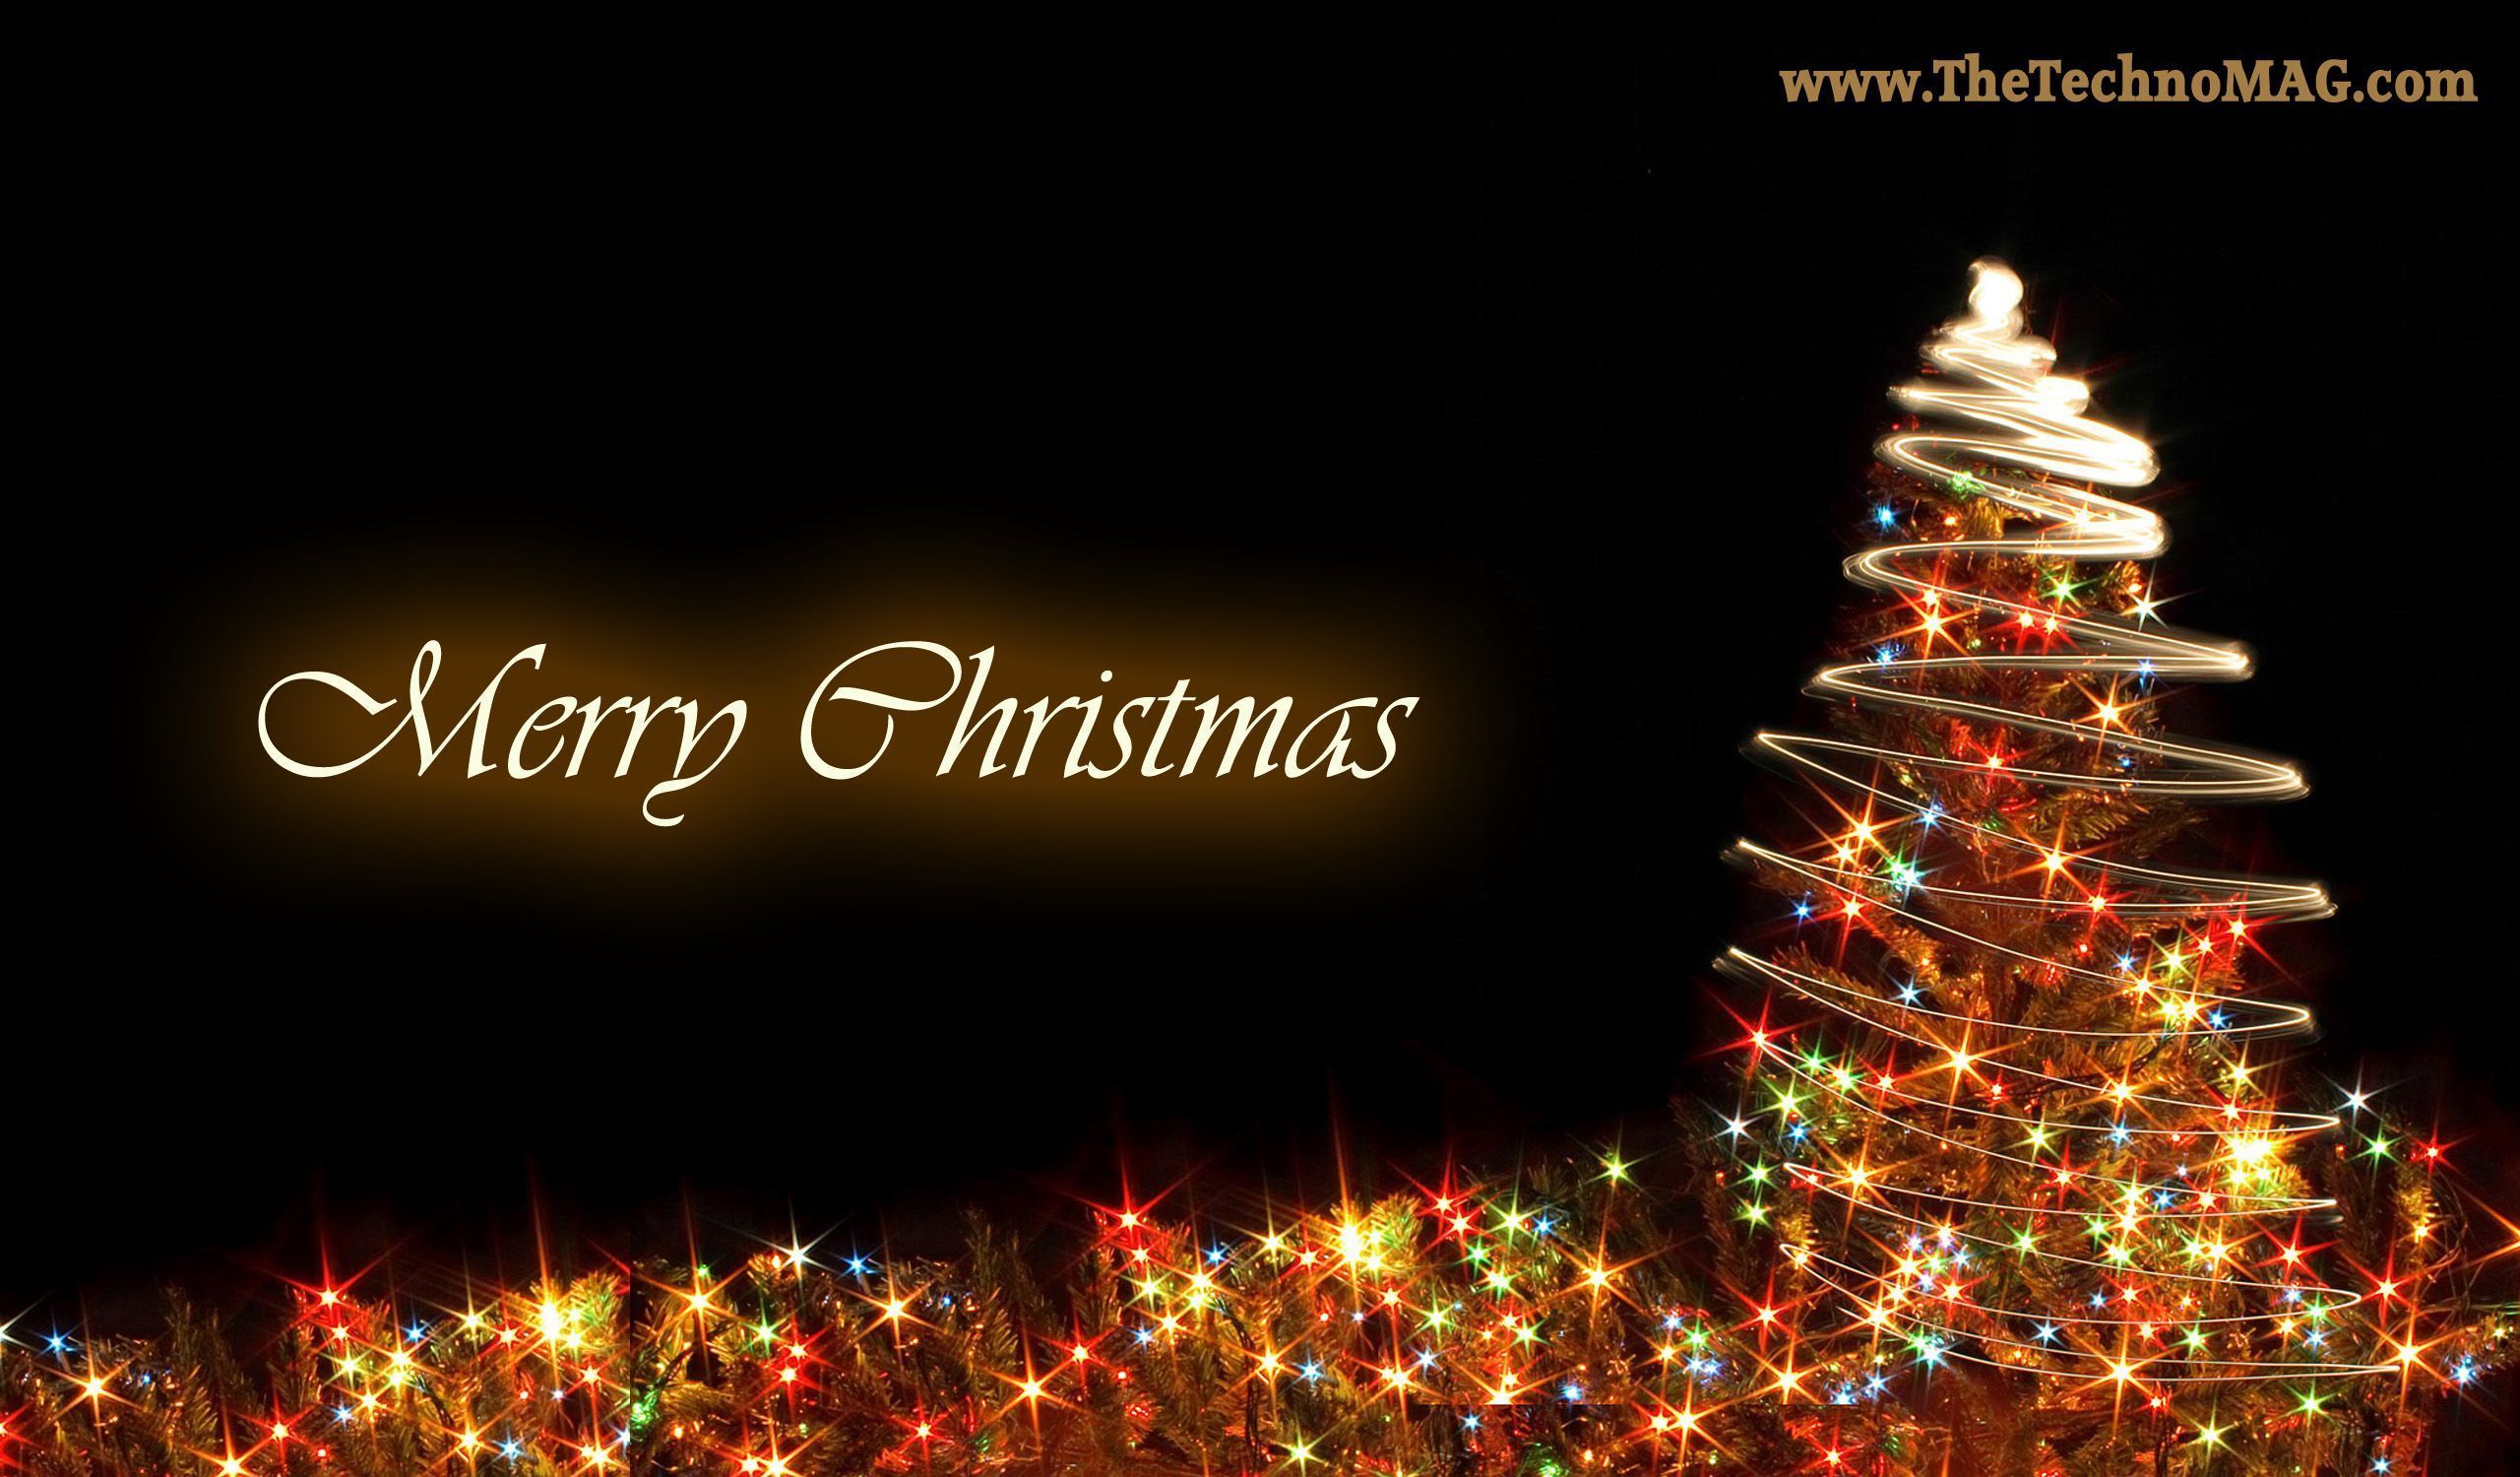 Merry Christmas Wallpaper Free Merry Christmas Background